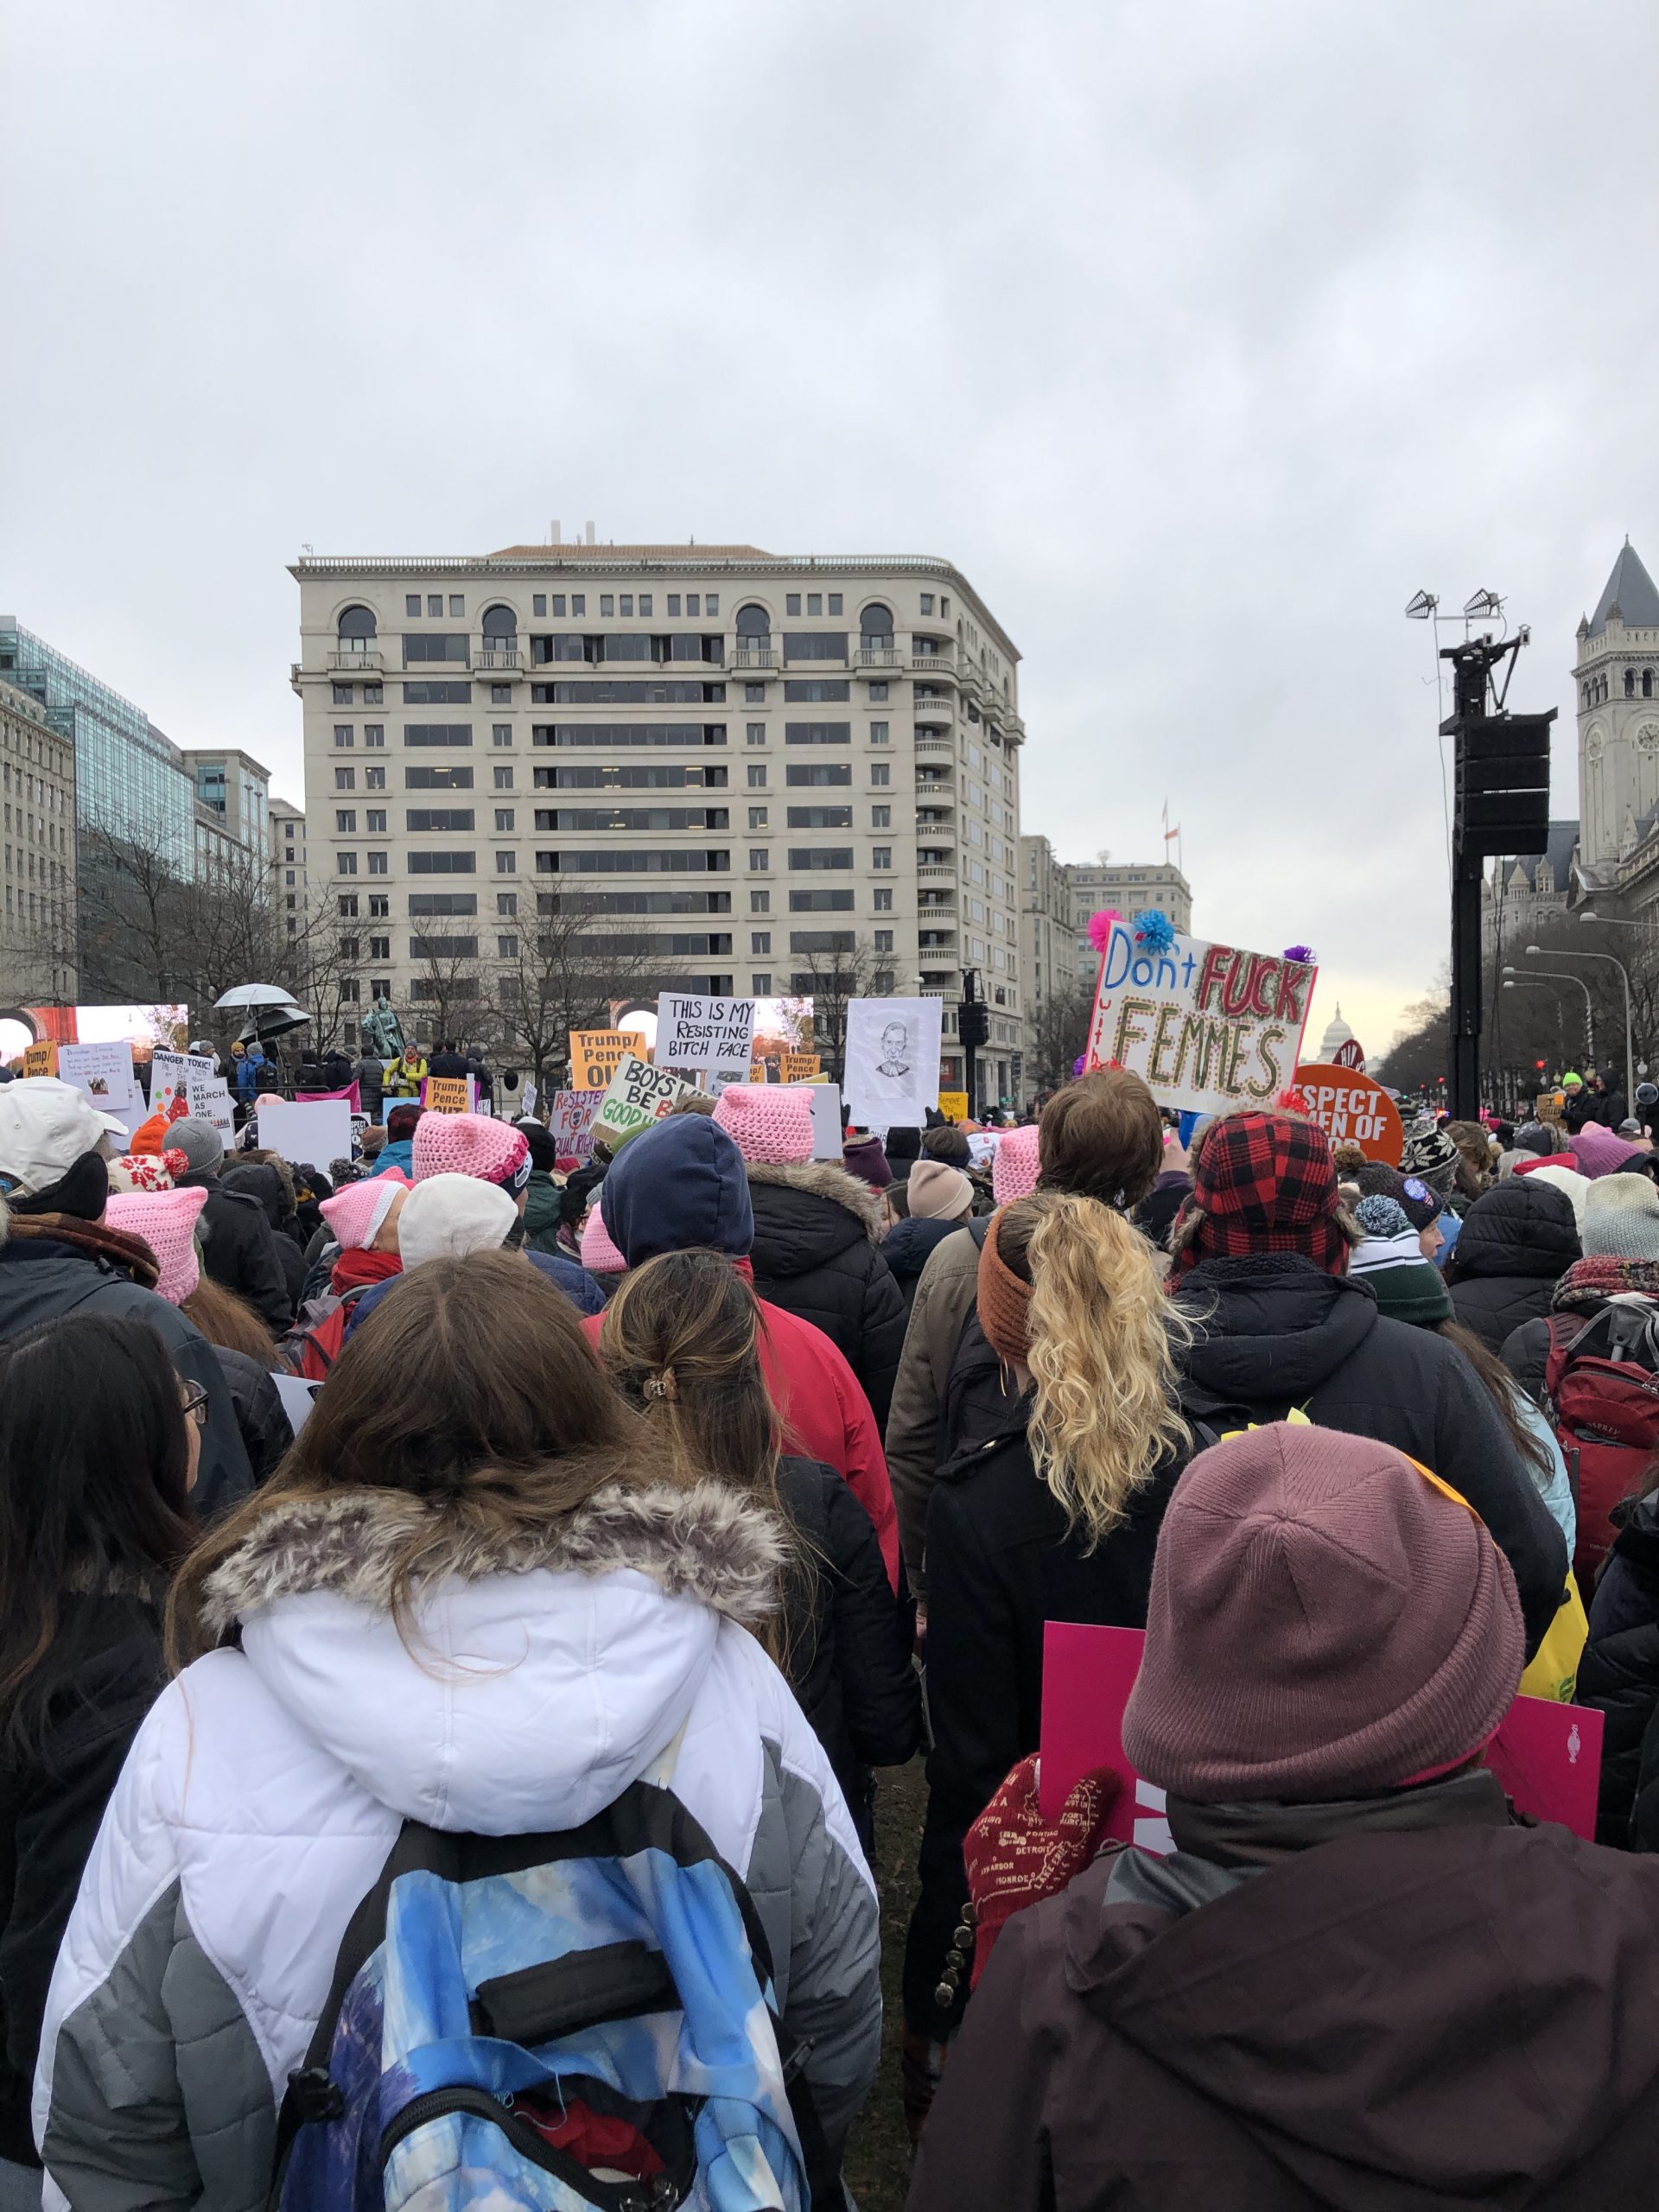 protesters at indépendance plaza in Washington dc woman's march 2020